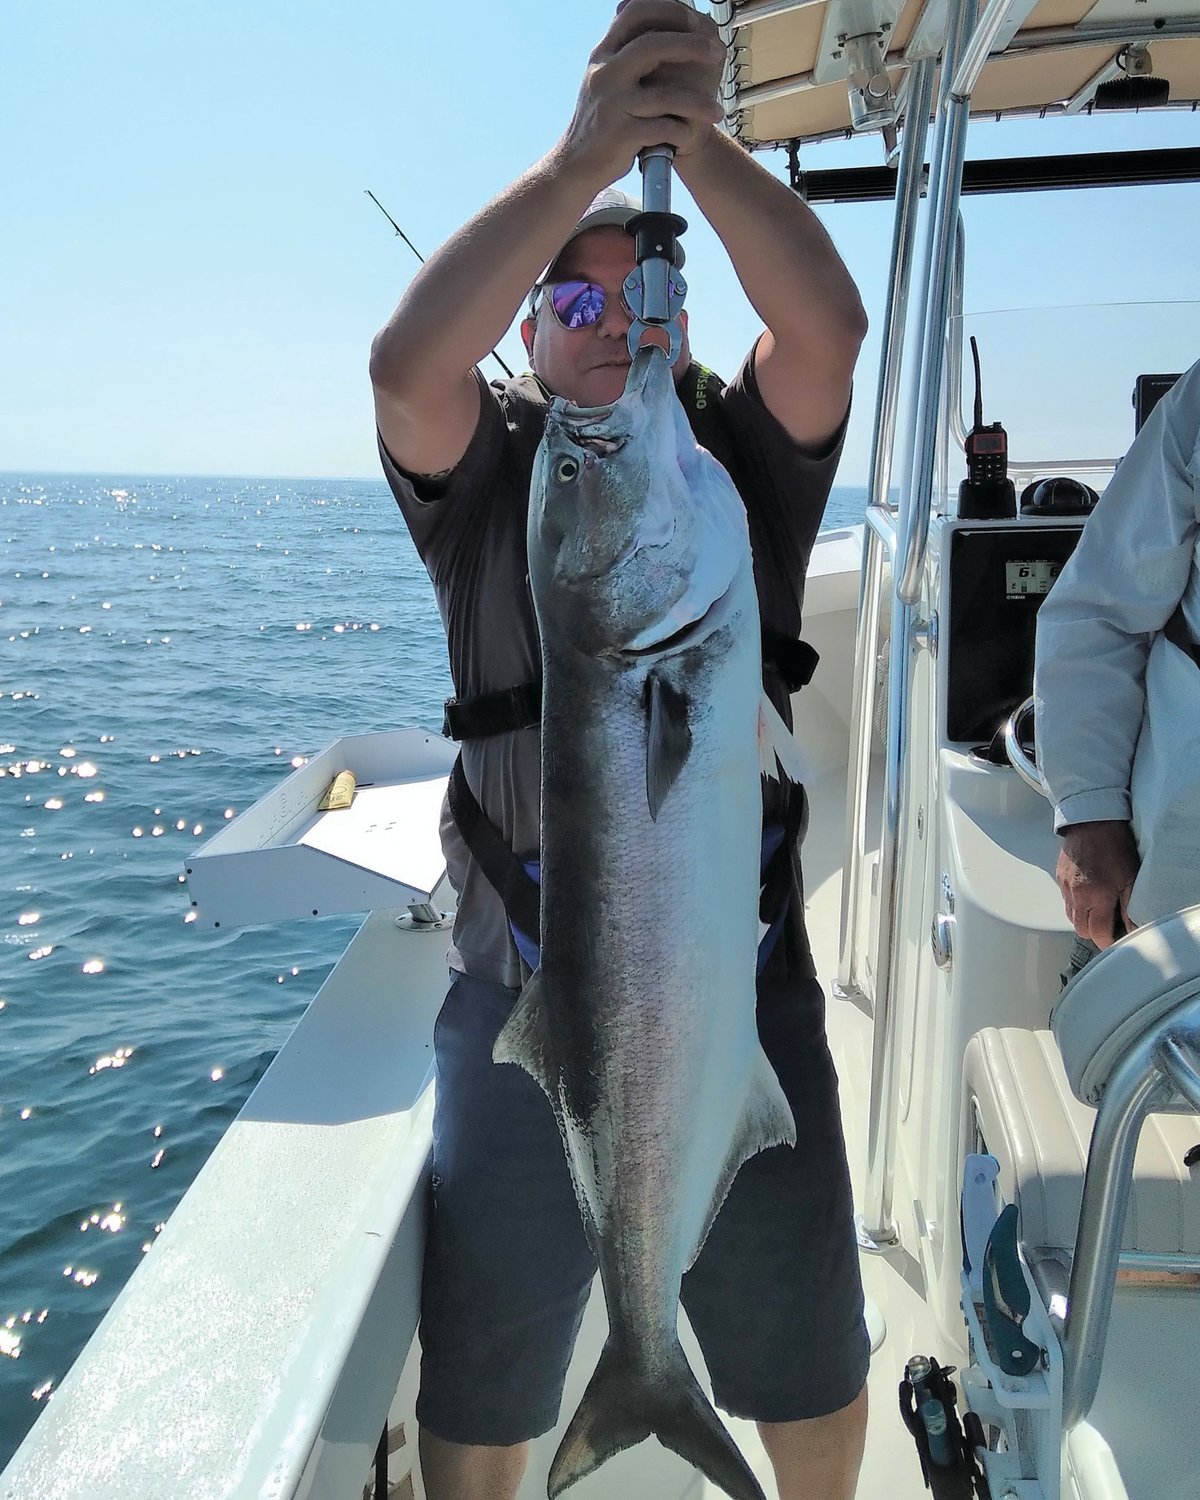 MONSTER BLUEFISH:  John O’Keefe of Jamestown with a 36” bluefish he caught and successfully released this summer.  The fish took first place in the Block Island Inshore Fishing Tournament. (Submitted photo)